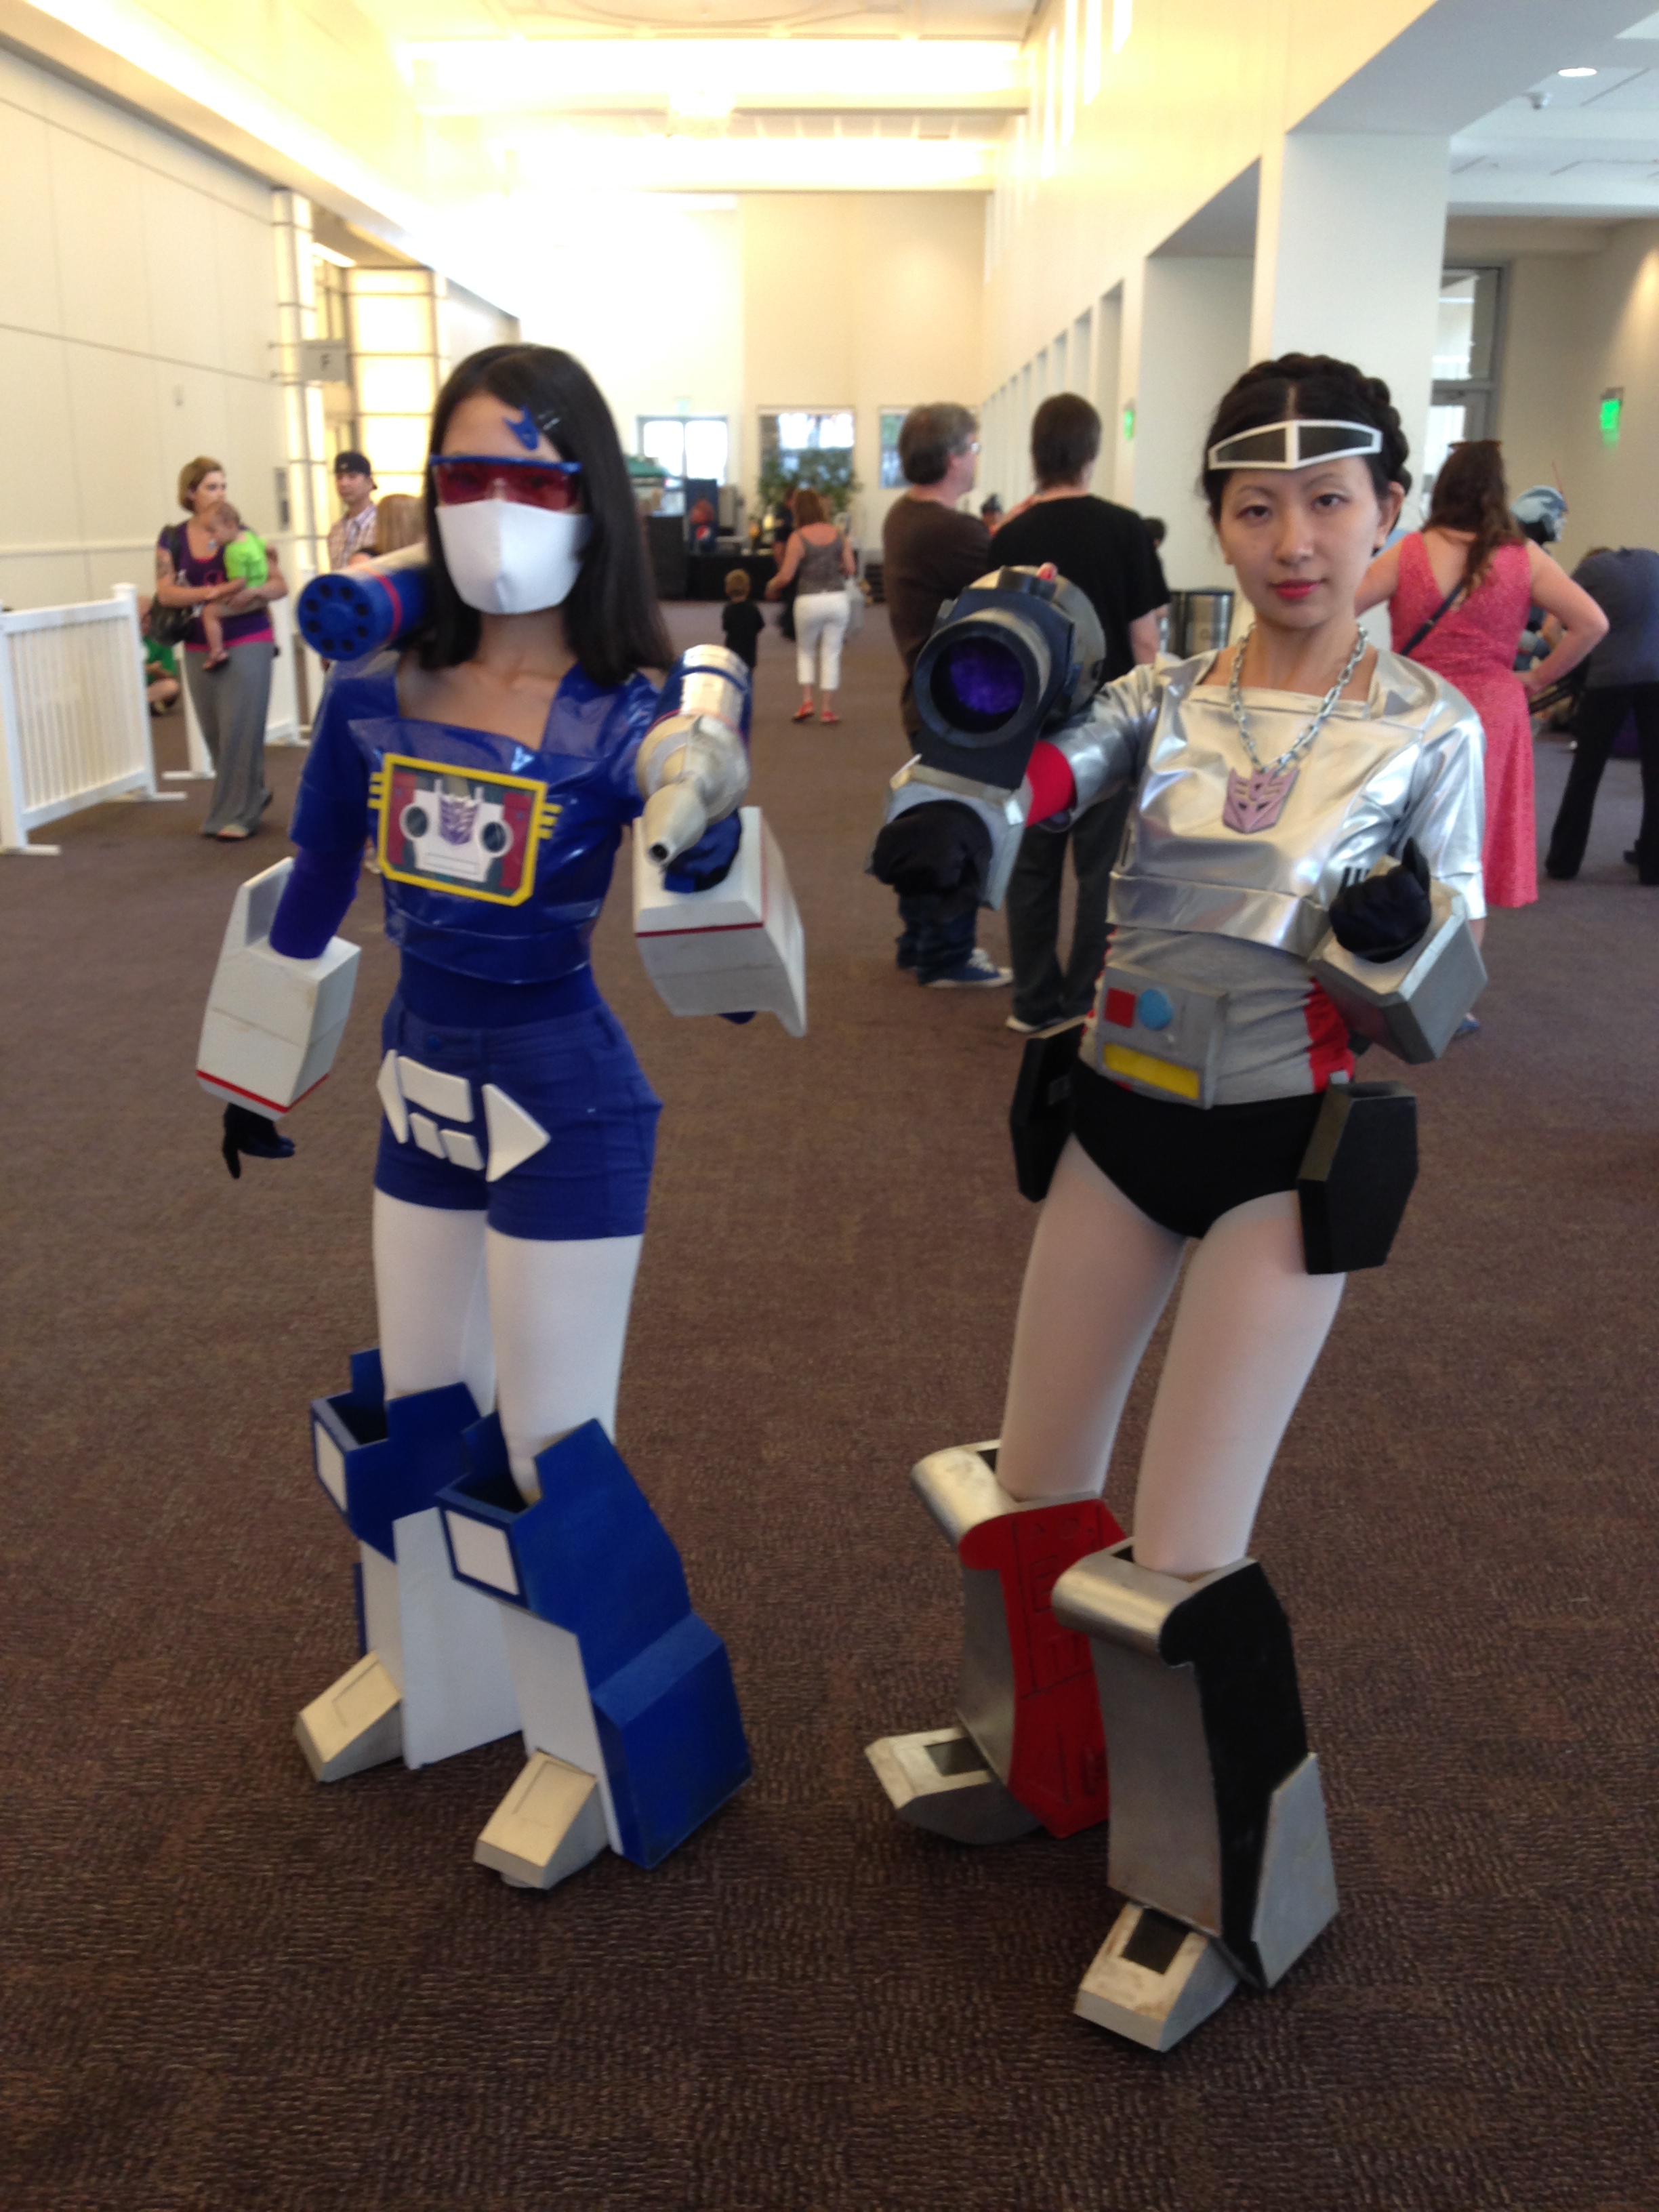 A real Soundwave and Megatron cosplayer. (Botcon Day 3)